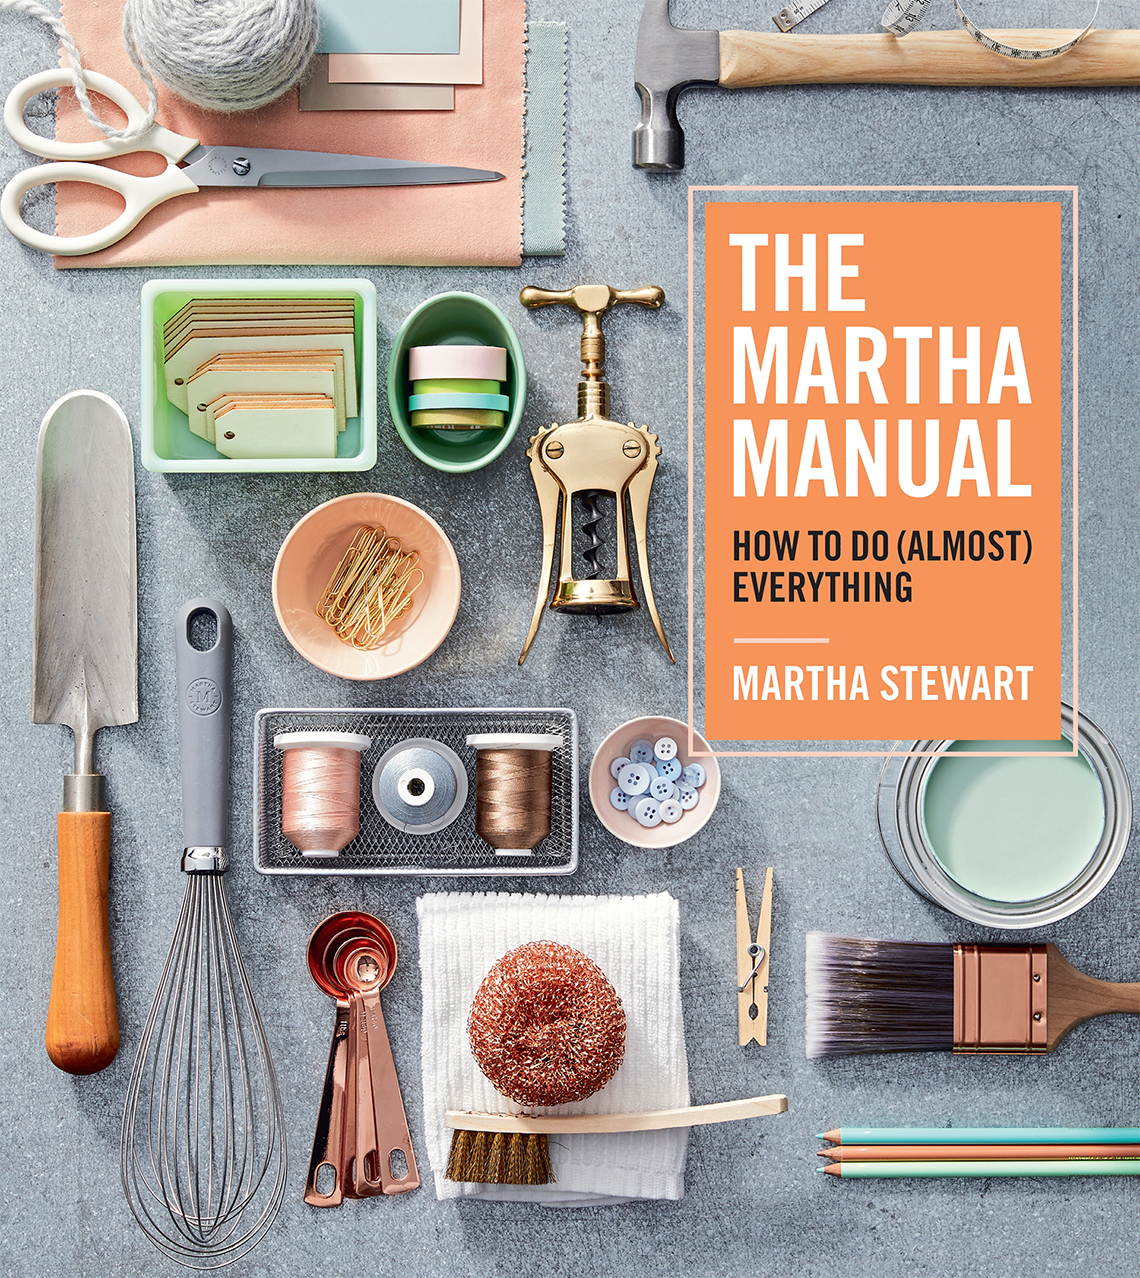 Book cover reads: The Martha Manual: How to Do (Almost) Everything, Martha Stewart